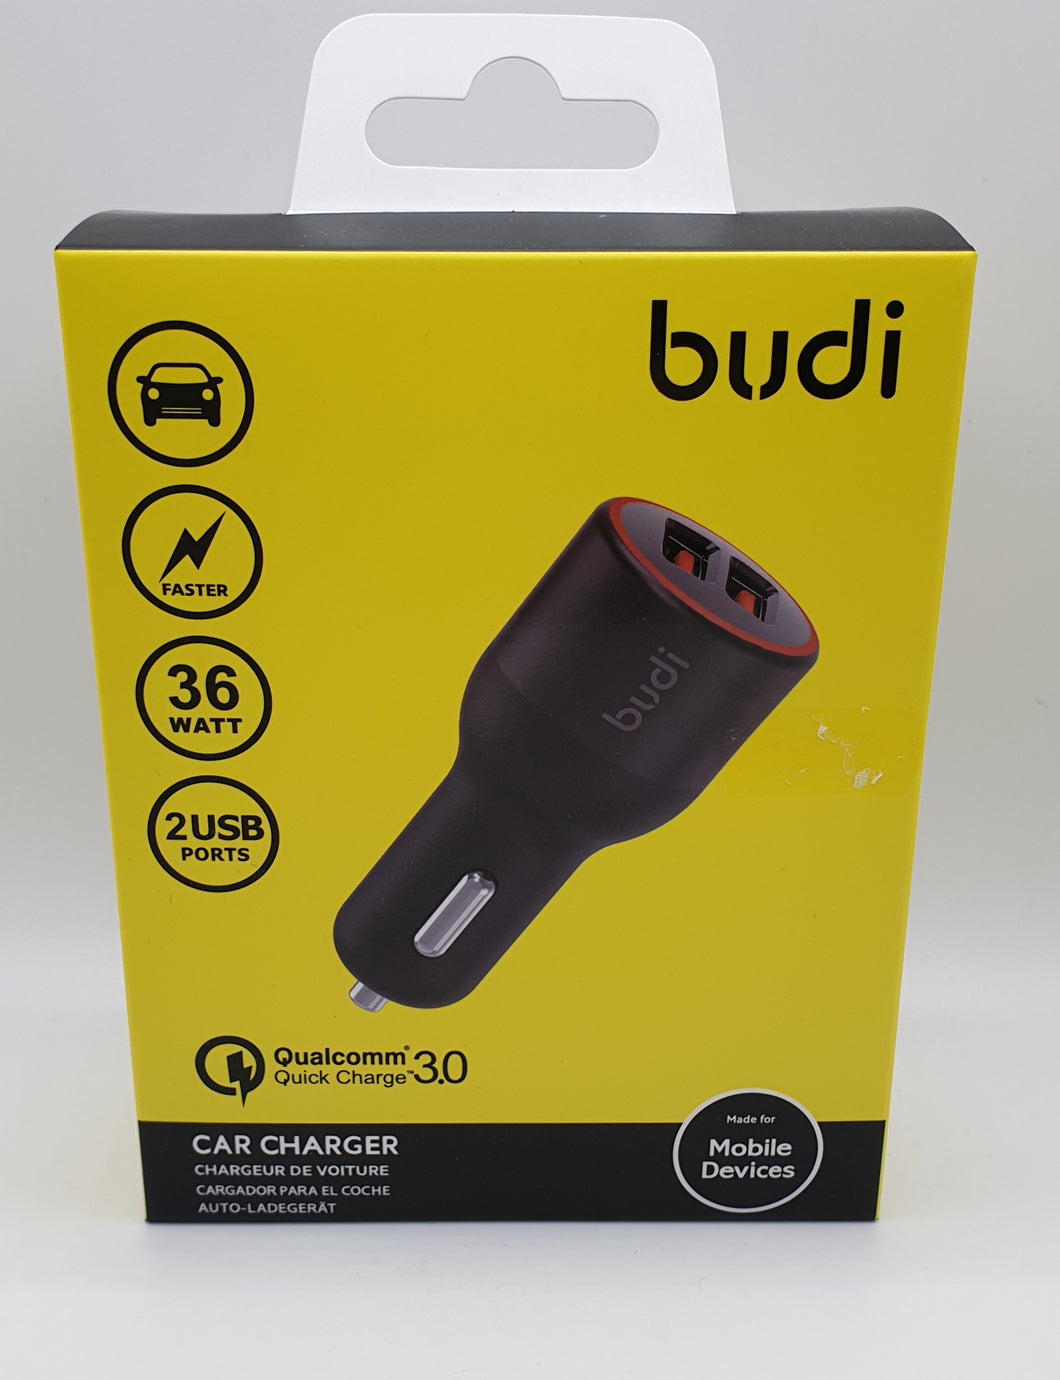 Budi Car Charger Double USB 3.4Amp Output Fast Charger For Smartphones & Tablets